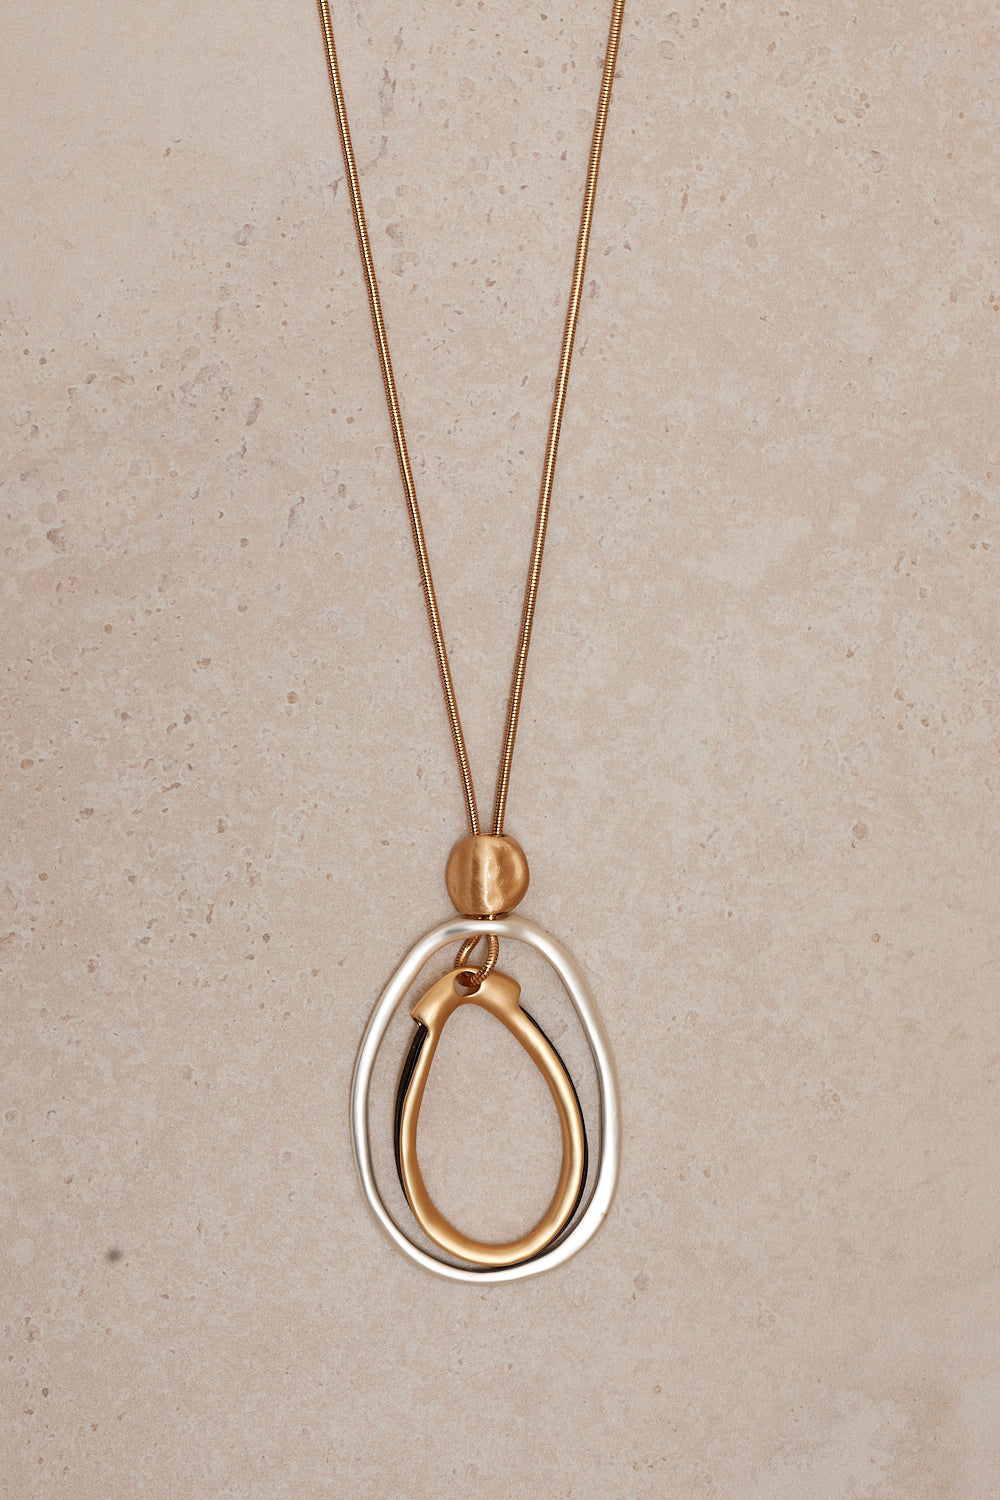 Dual Harmony Pendant Necklace - Gold/Silver